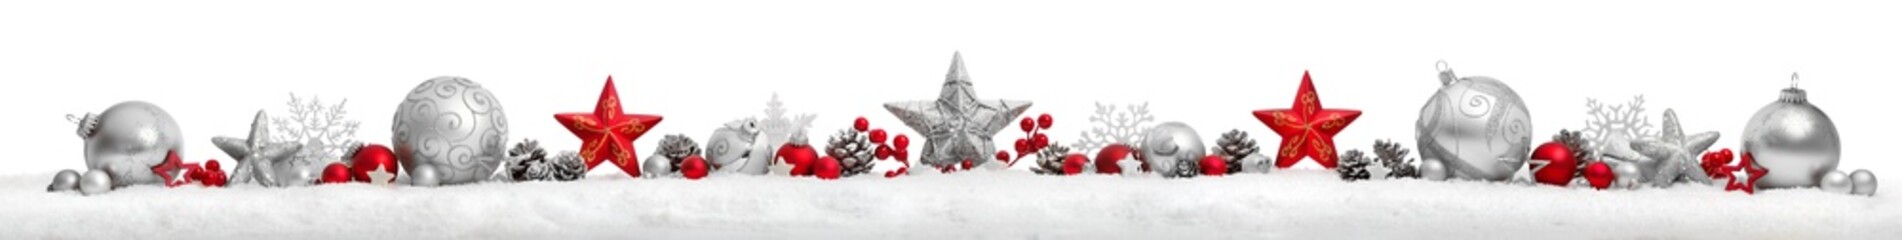 Christmas border or banner with stars and baubles arranged in a row on snow, extra wide and...